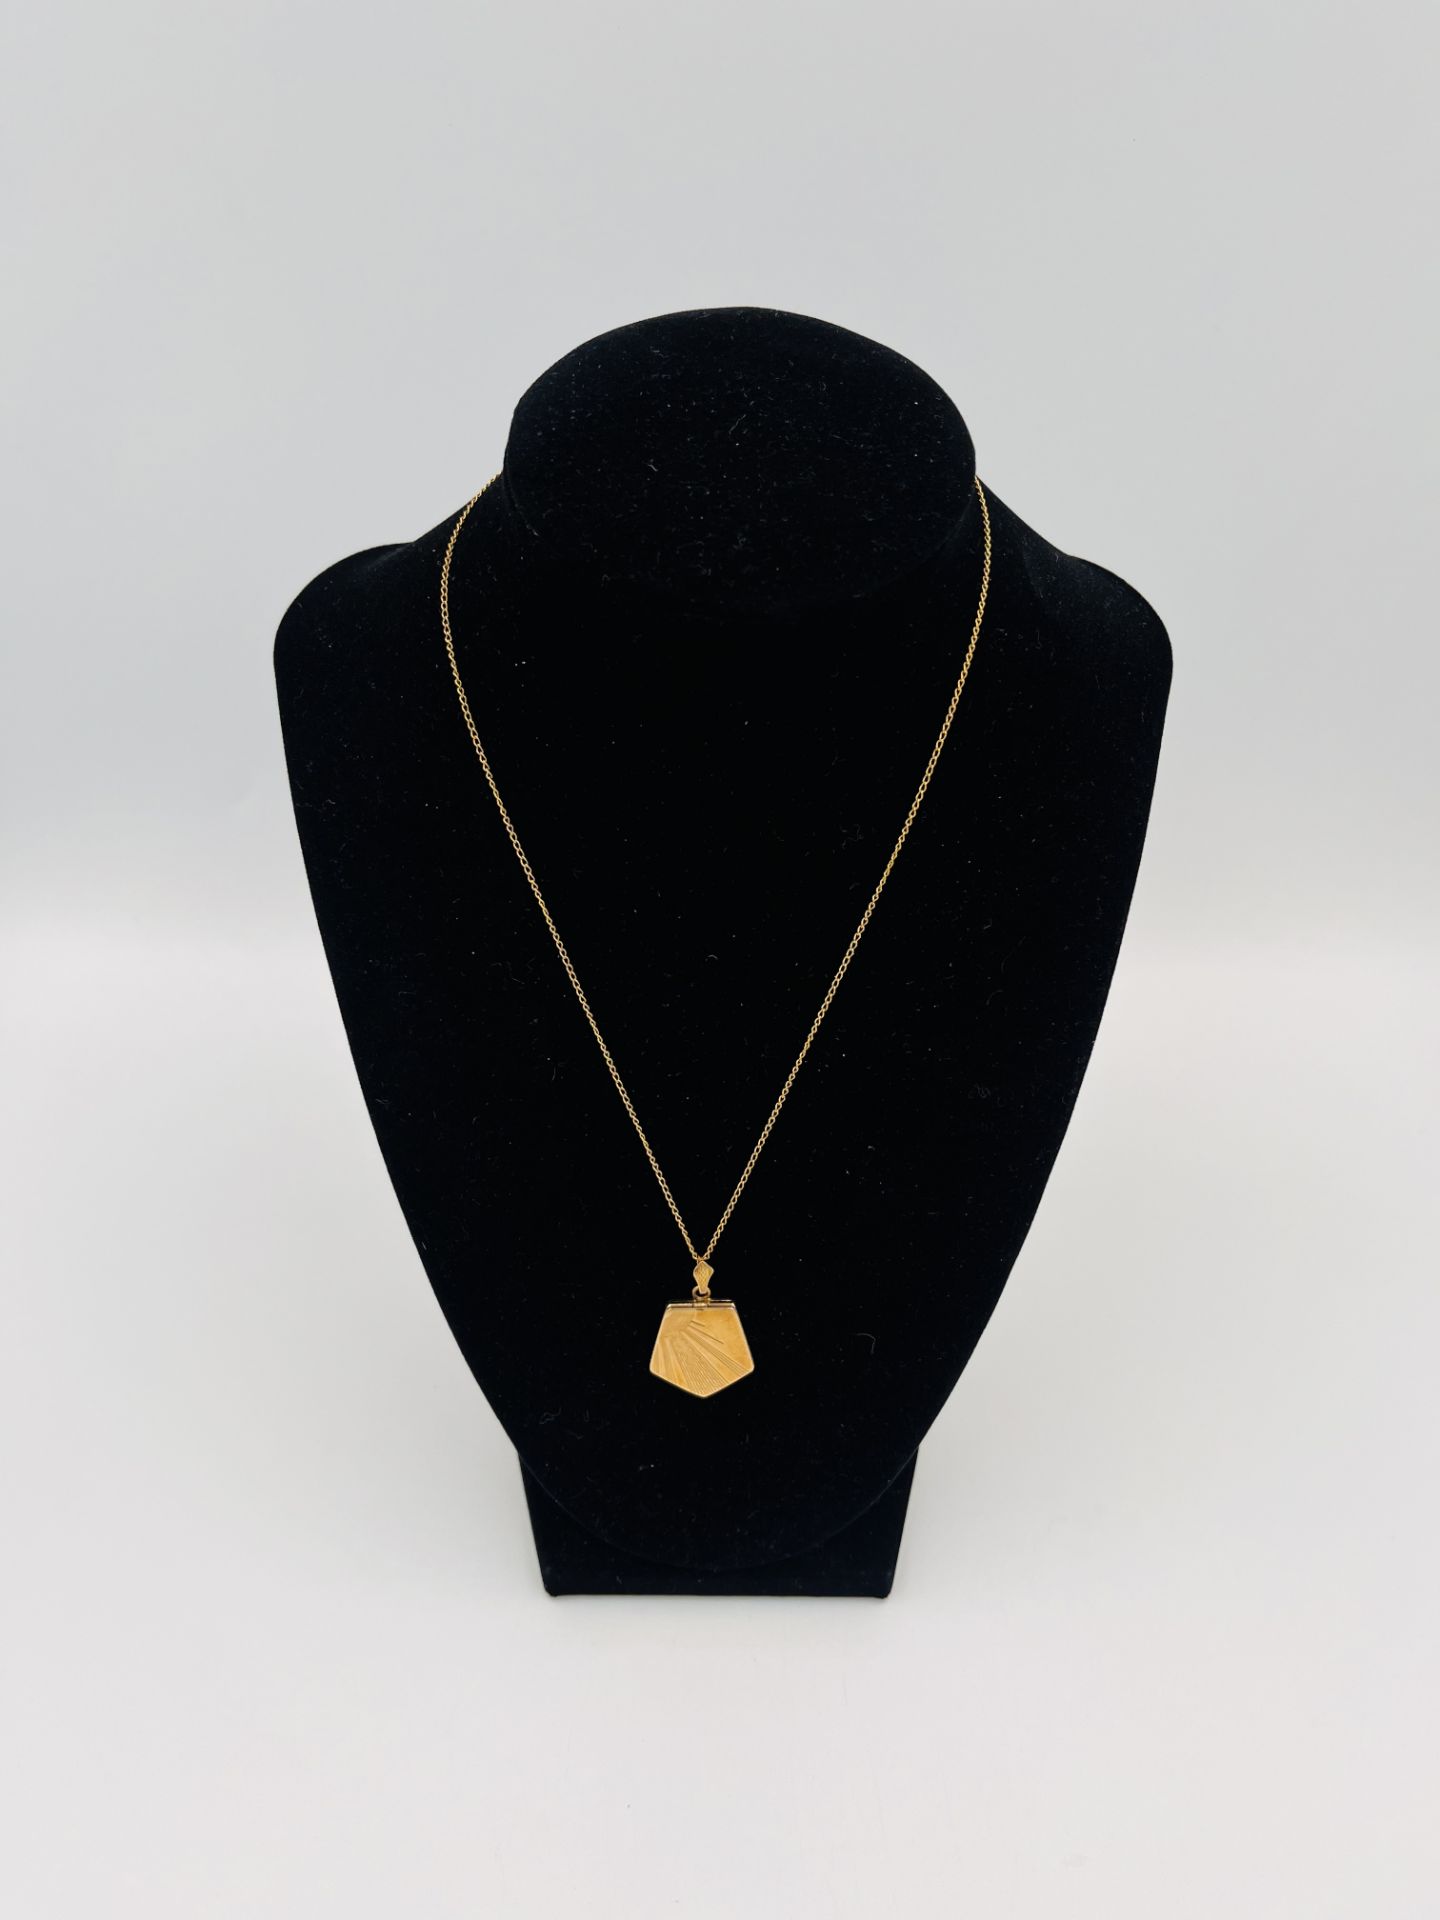 9ct gold locket on 9ct gold chain - Image 2 of 6